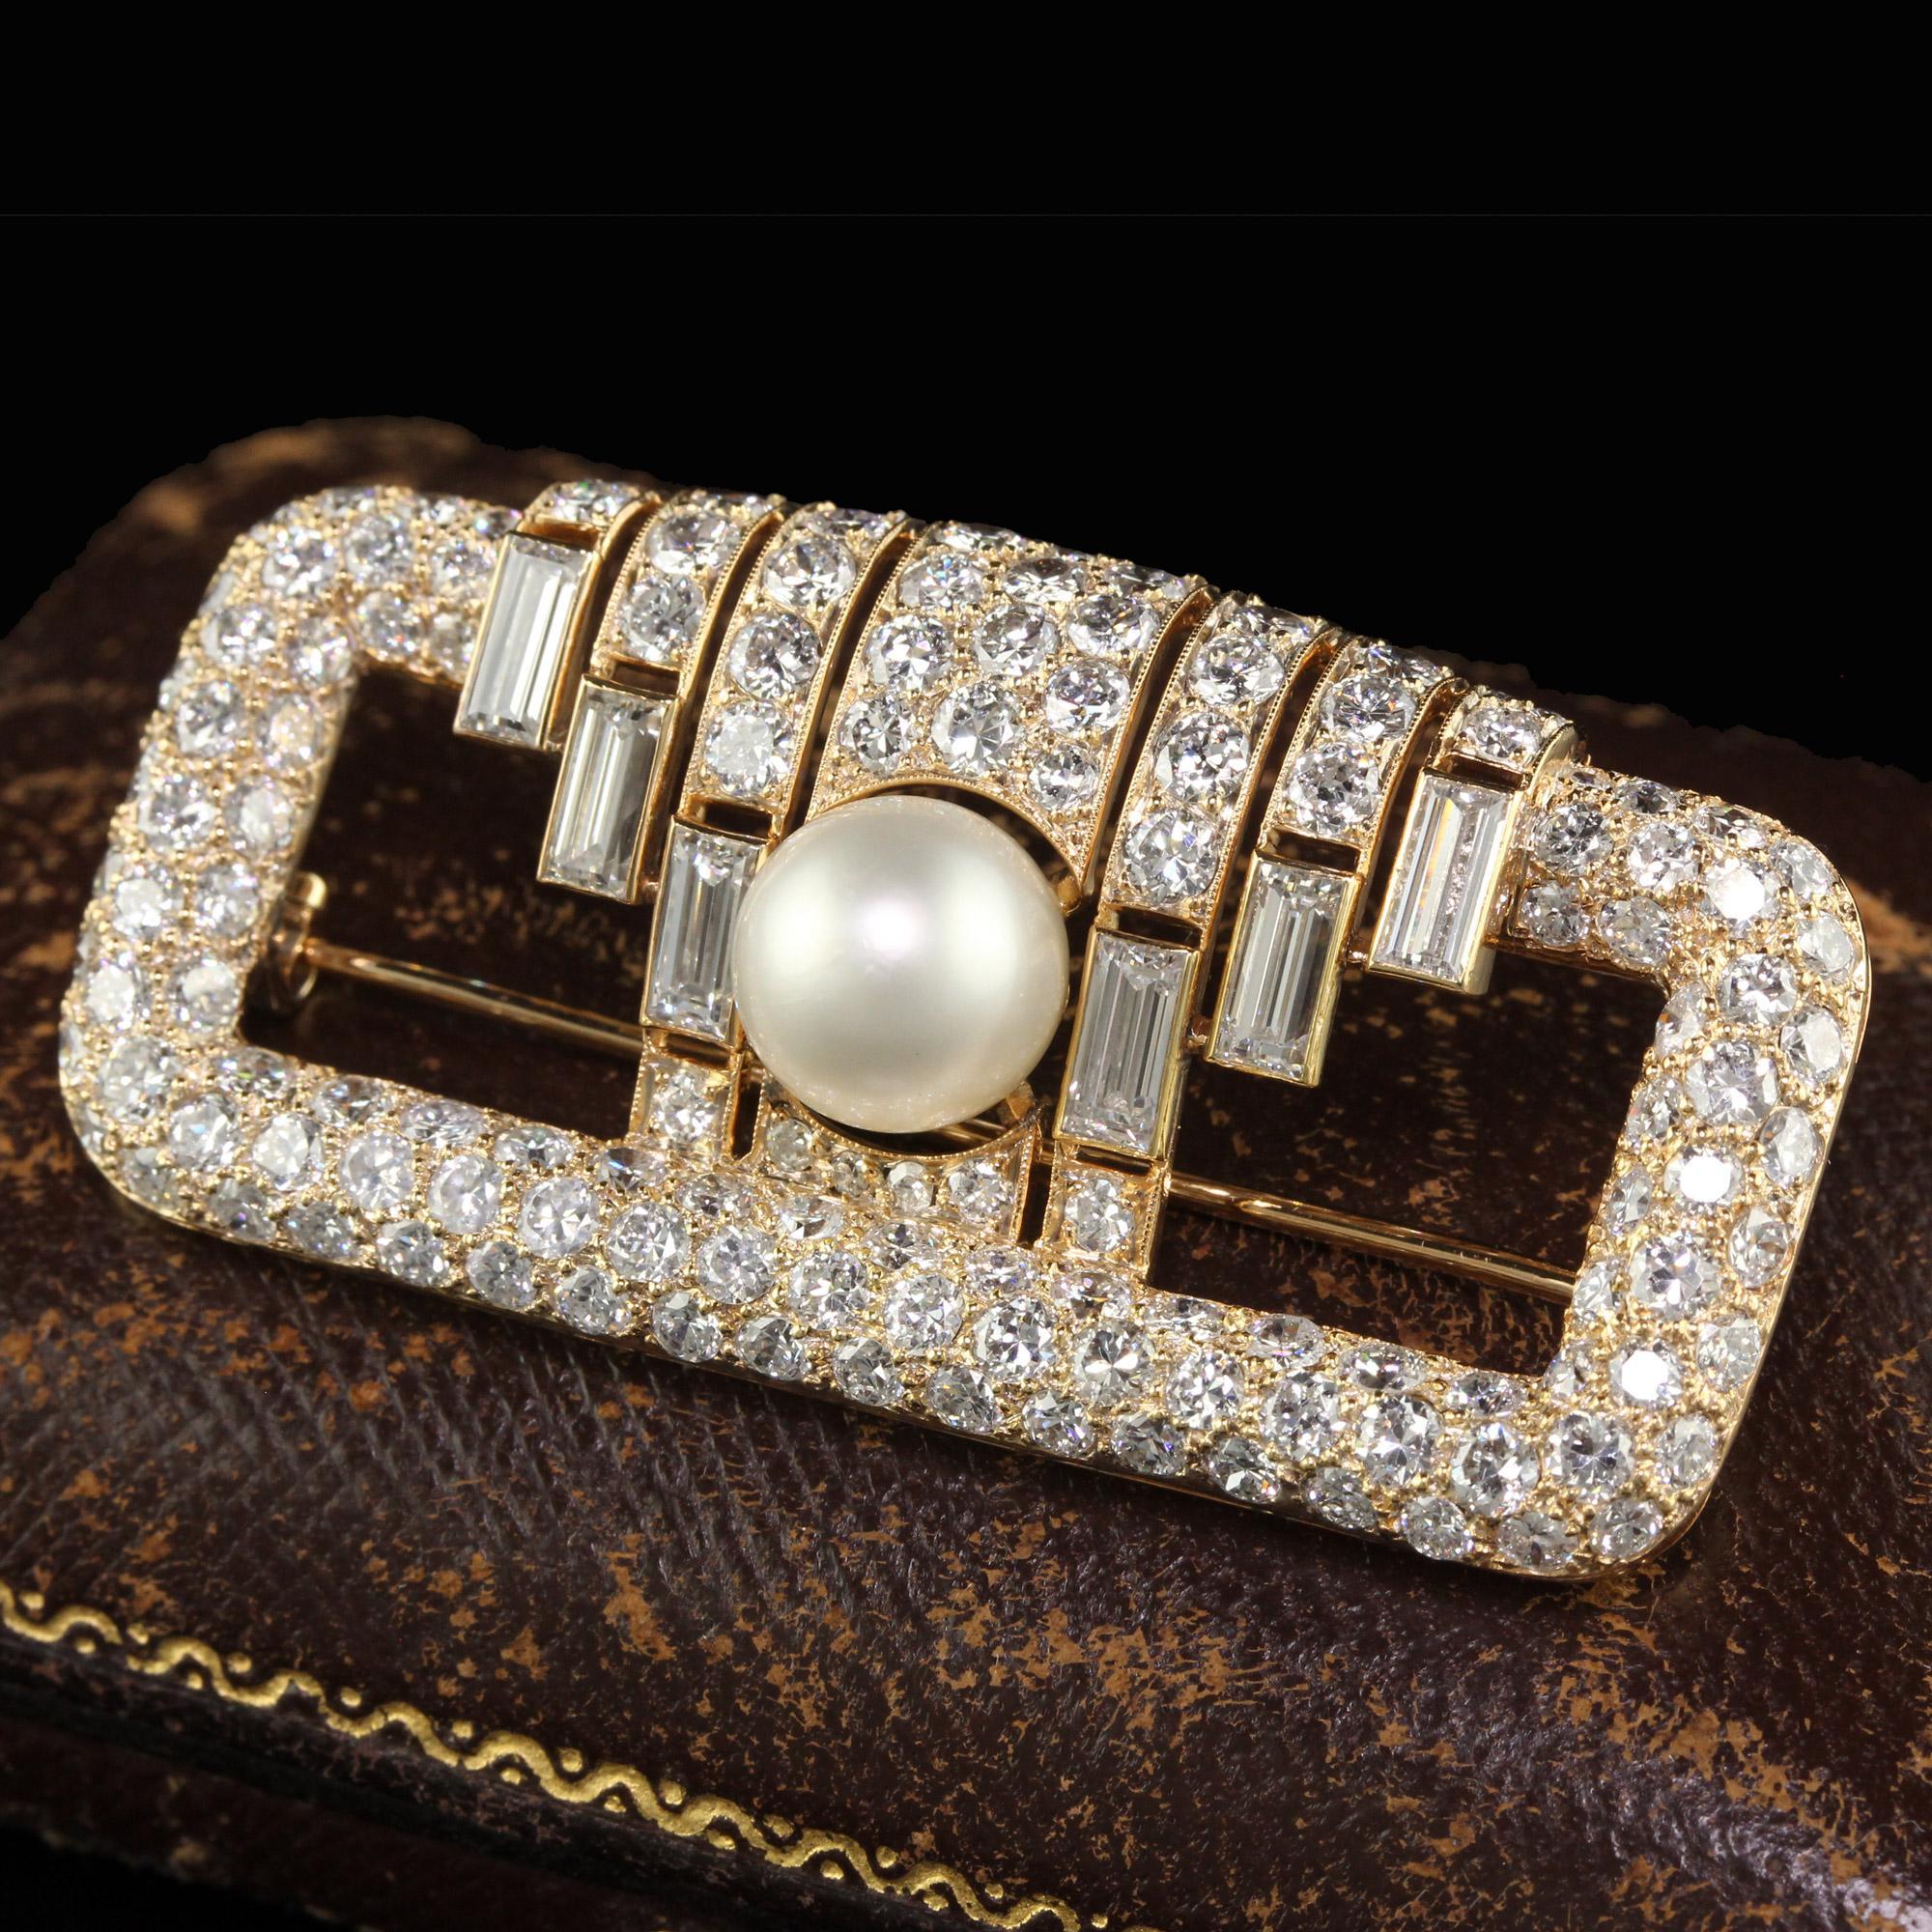 Vintage Retro Cartier 18K Yellow Gold Diamond Natural Pearl Brooch Pin - GIA In Good Condition For Sale In Great Neck, NY